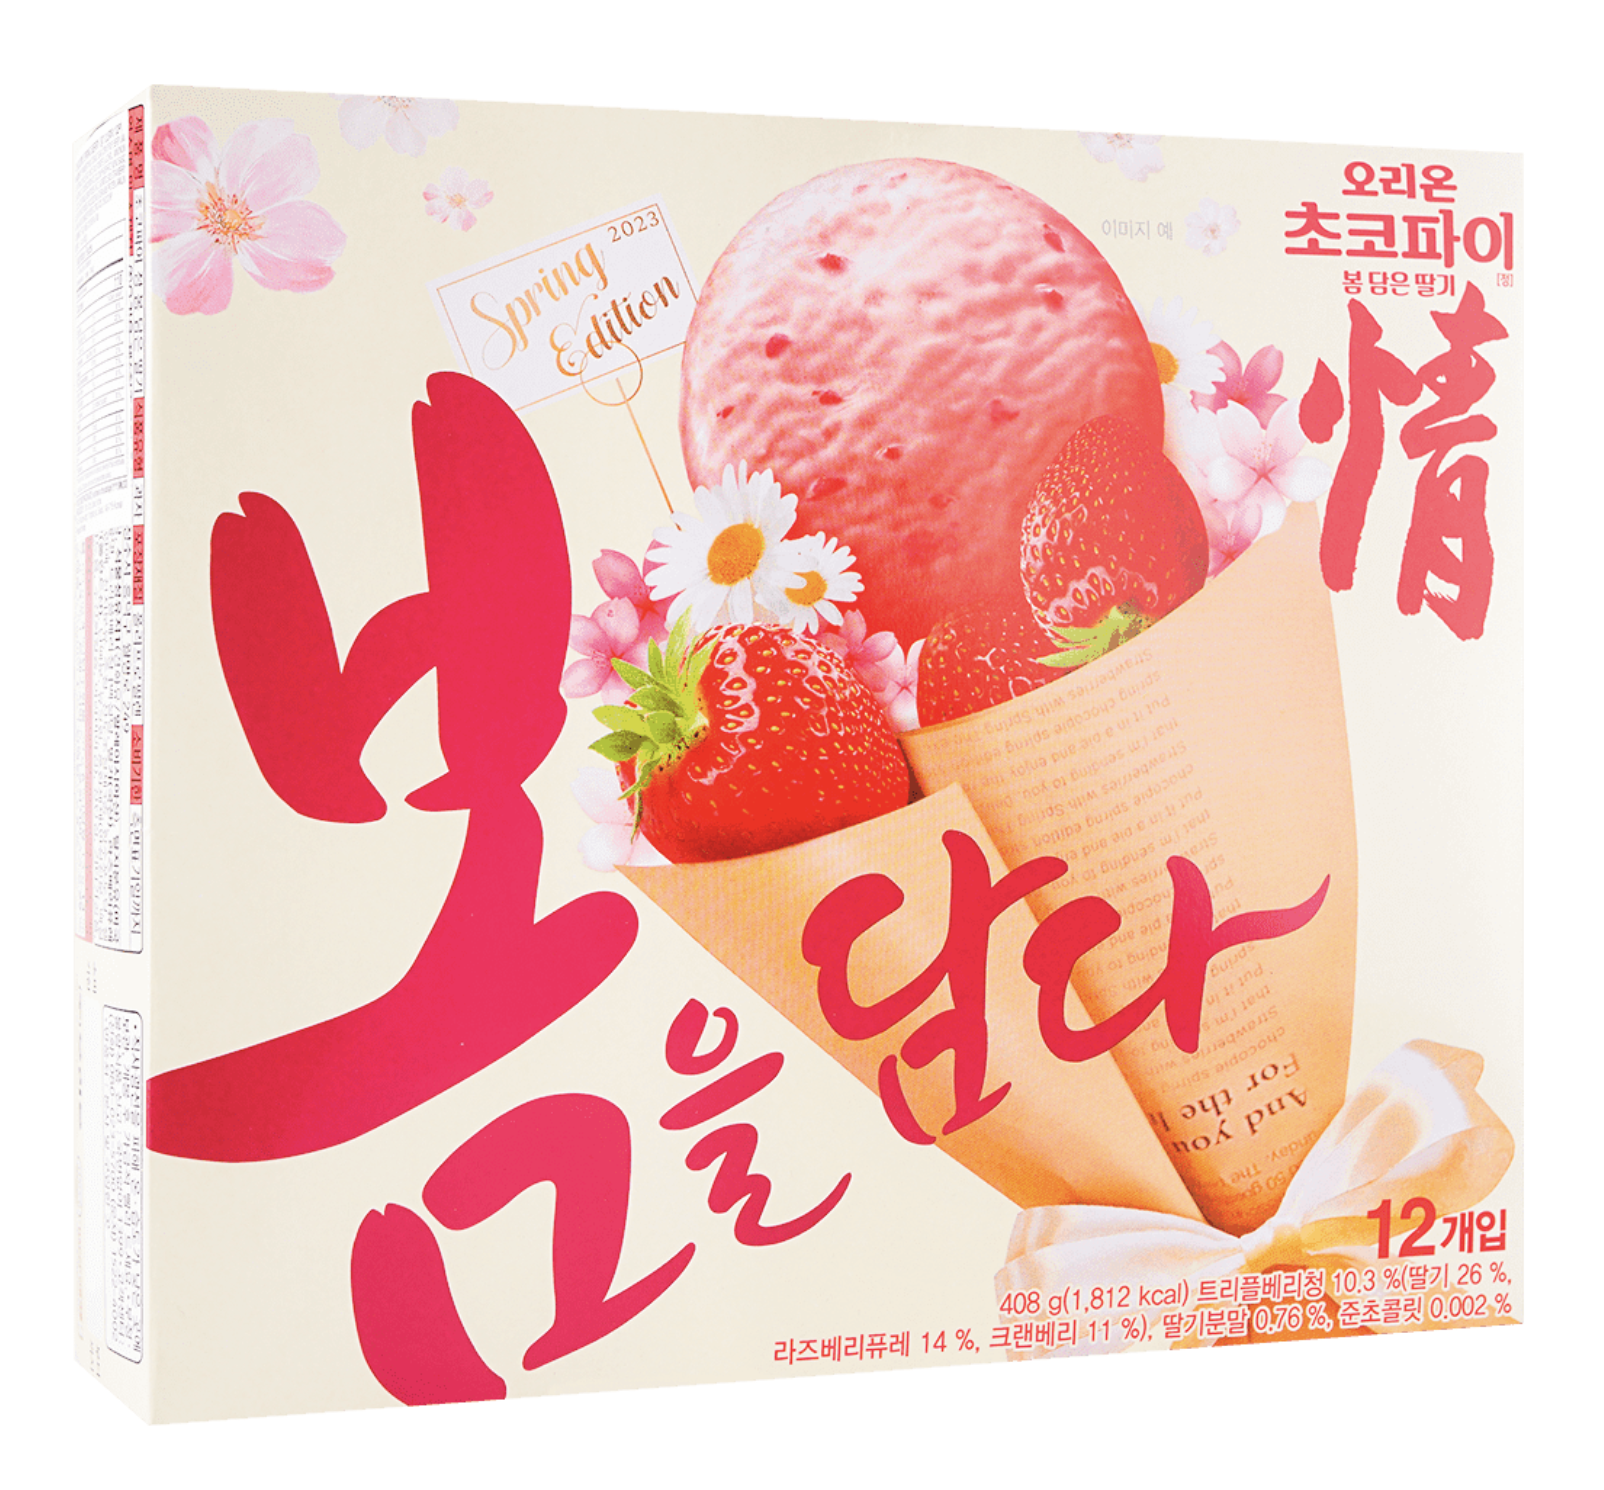 Orion Choco Pie Spring Berry Limited Flavor - 14.39 oz